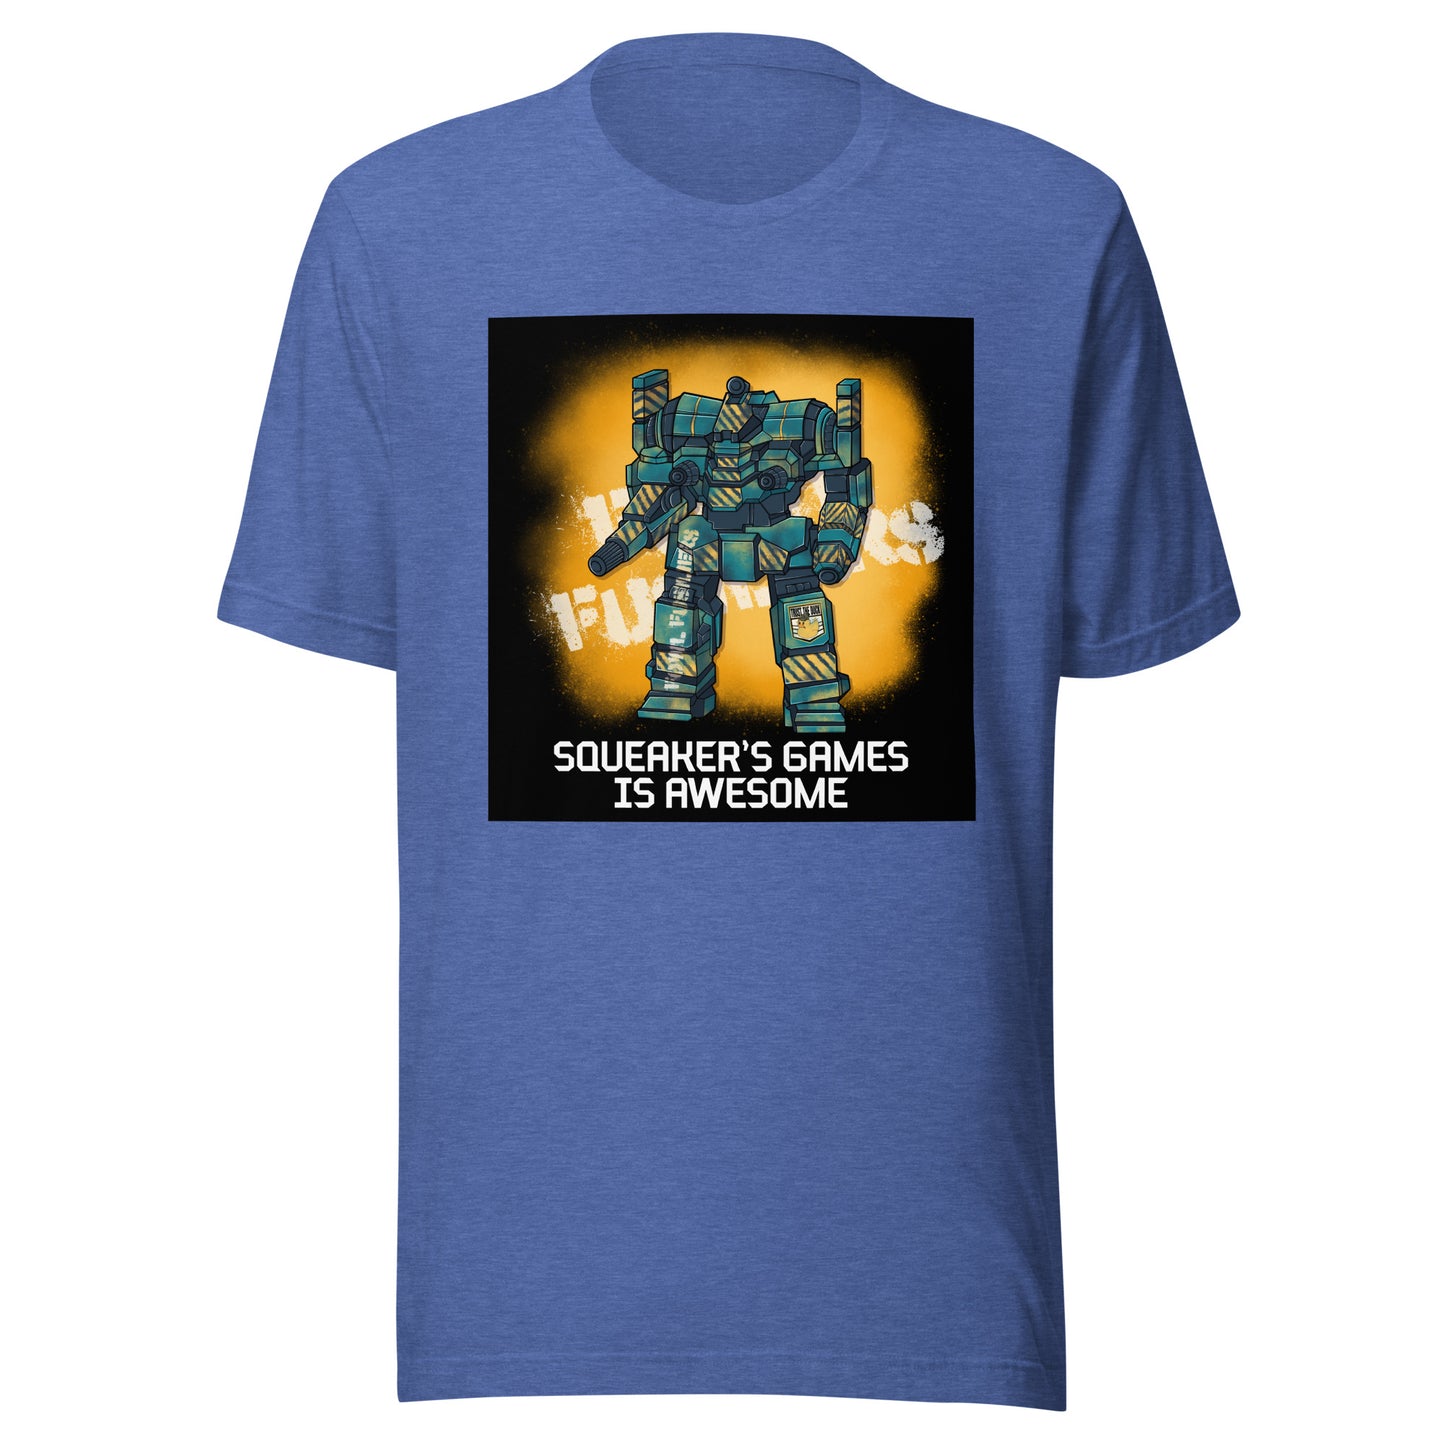 Squeakers Games is Awesome! Unisex t-shirt